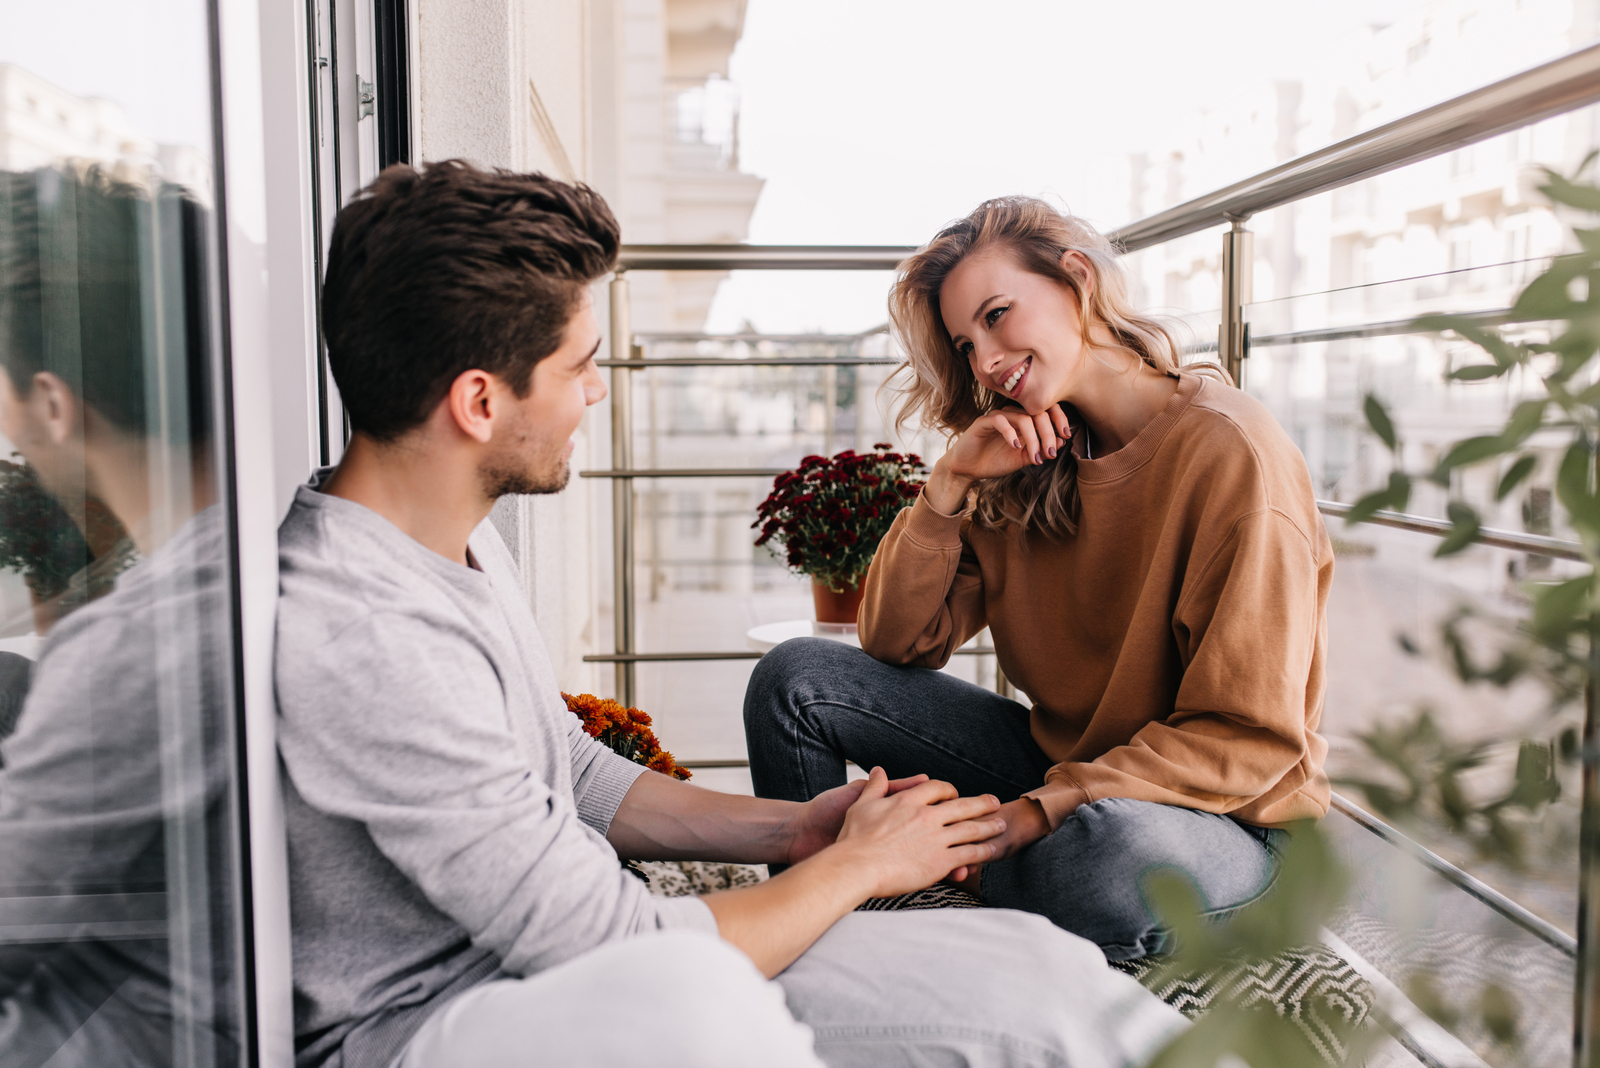 a smiling man and woman sit on the balcony and talk